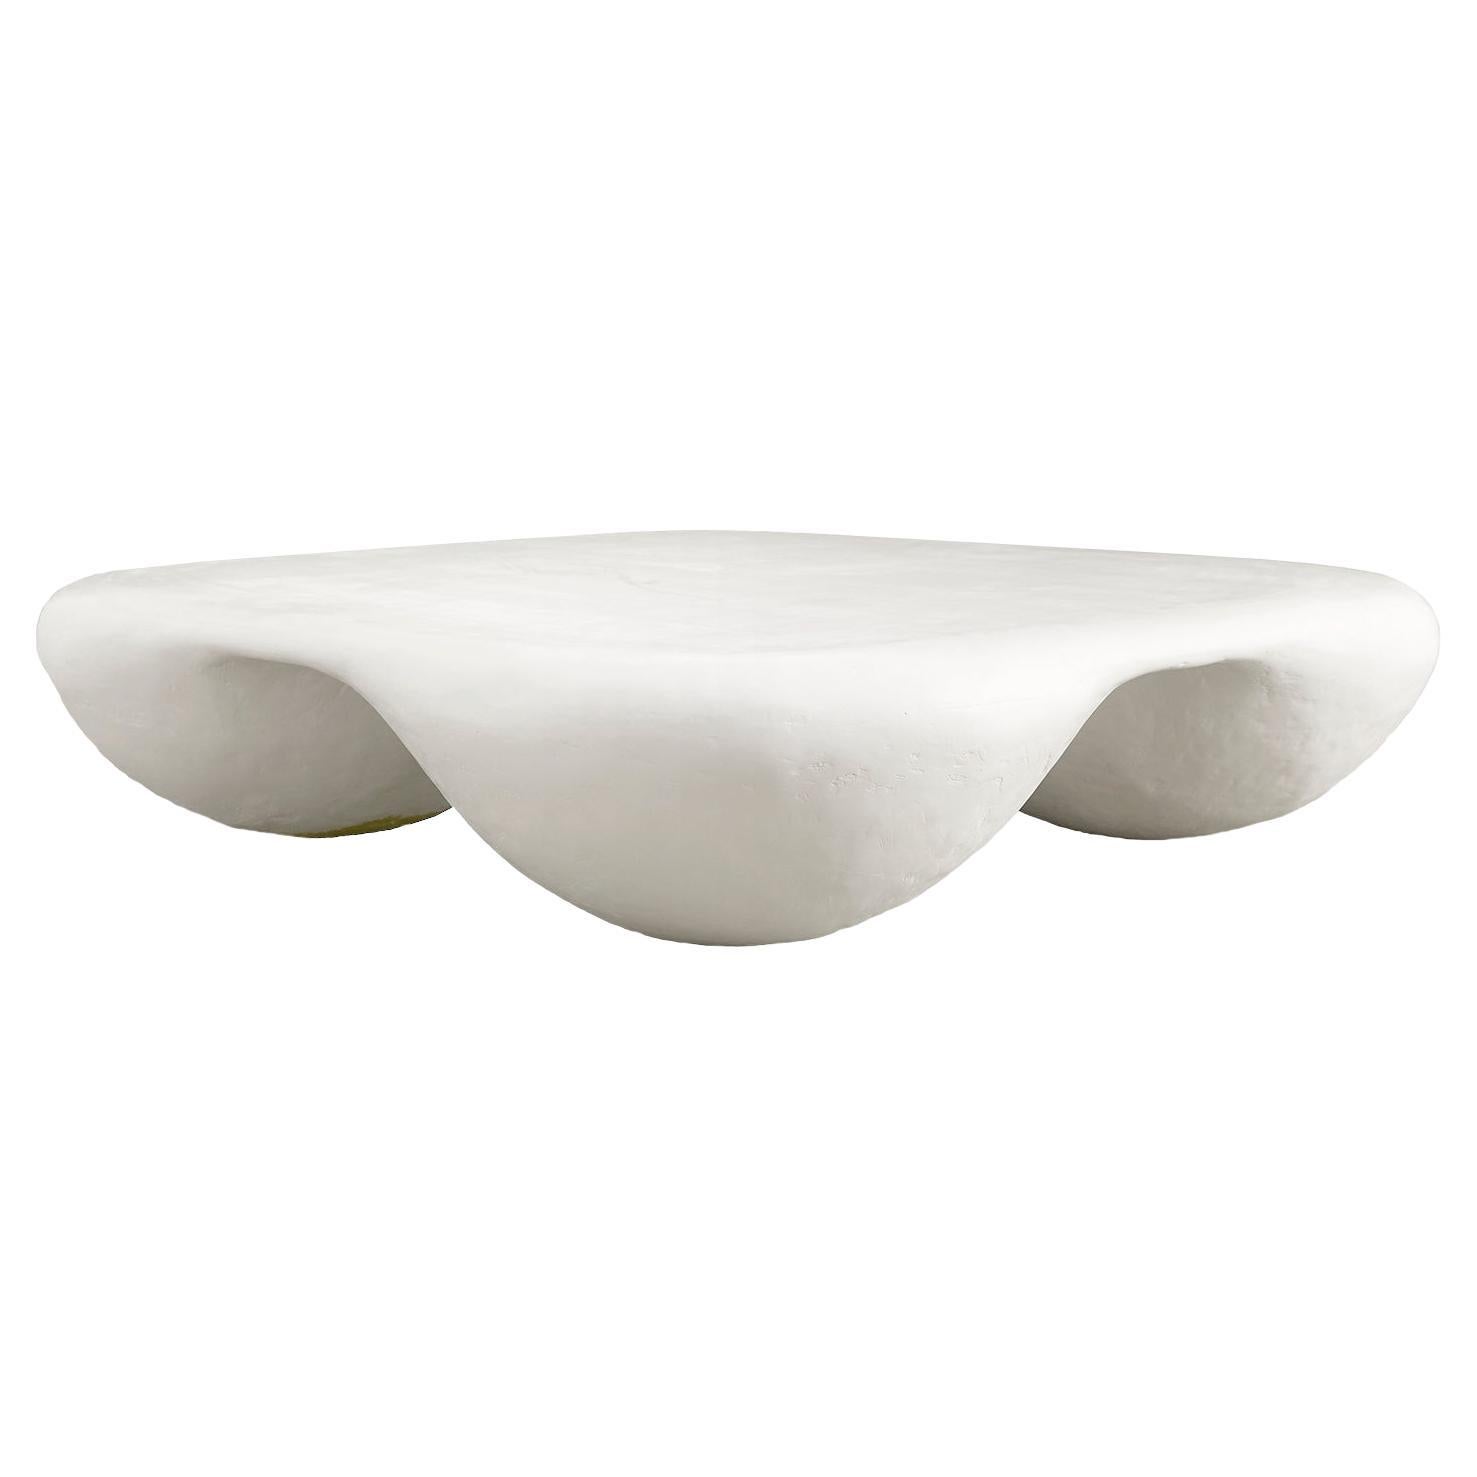 White Rounded Square Quad Coffee Table in Stone Composite by Mike Ruiz-Serra